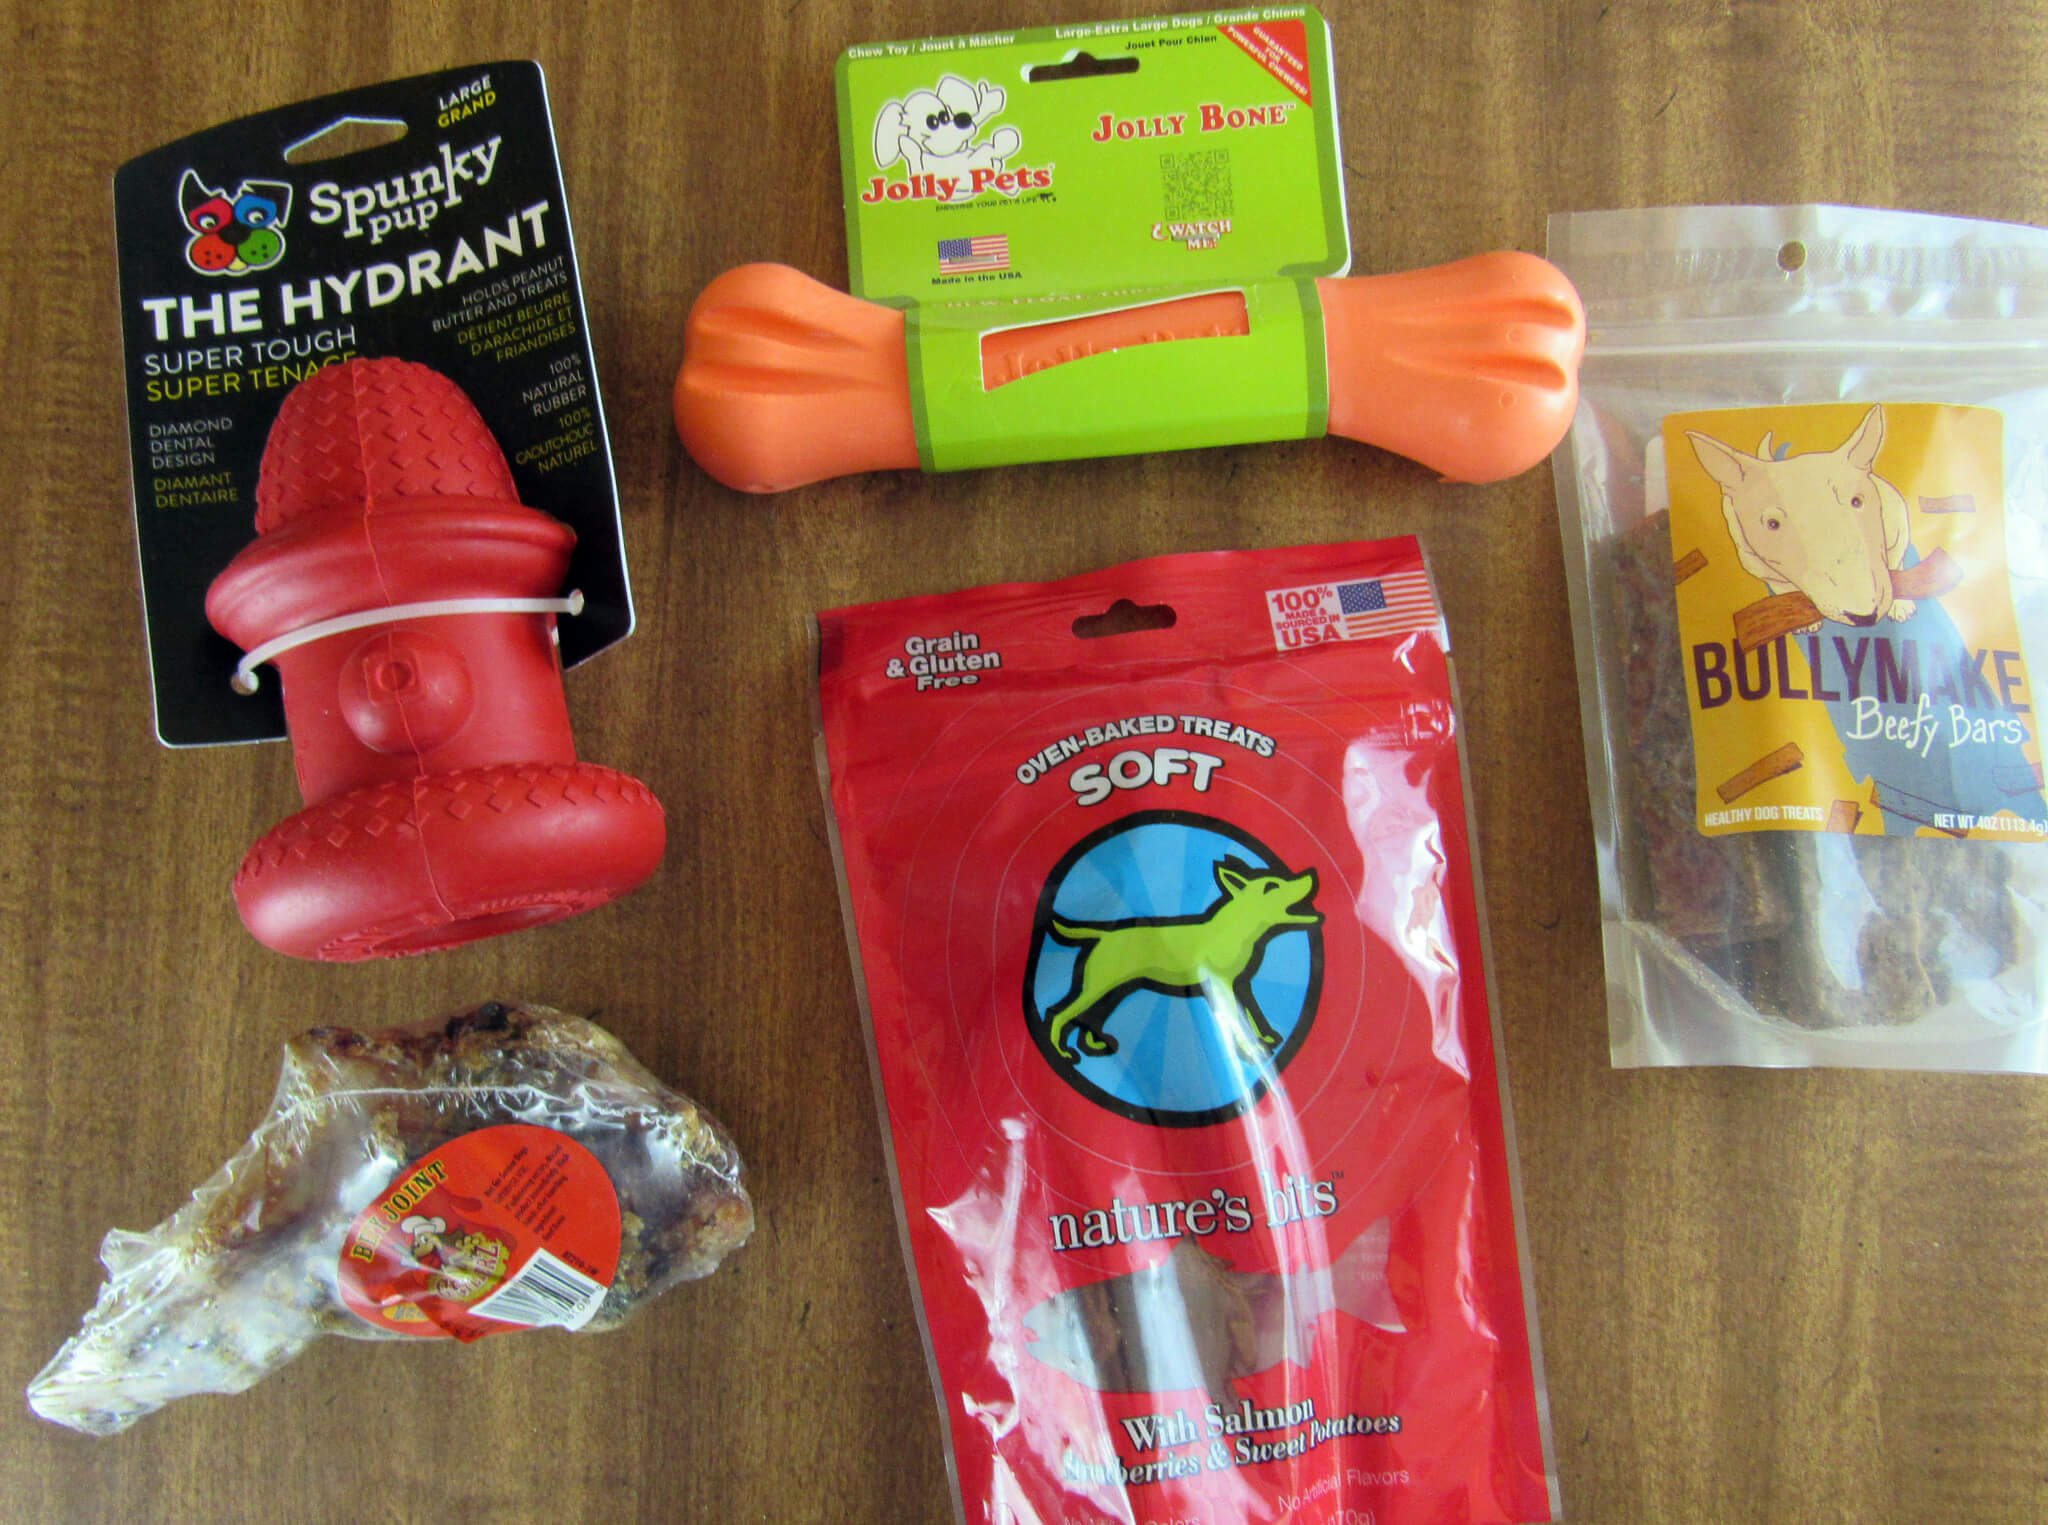 Bullymake Review: A Monthly Subscription Box for Ruff and Tuff